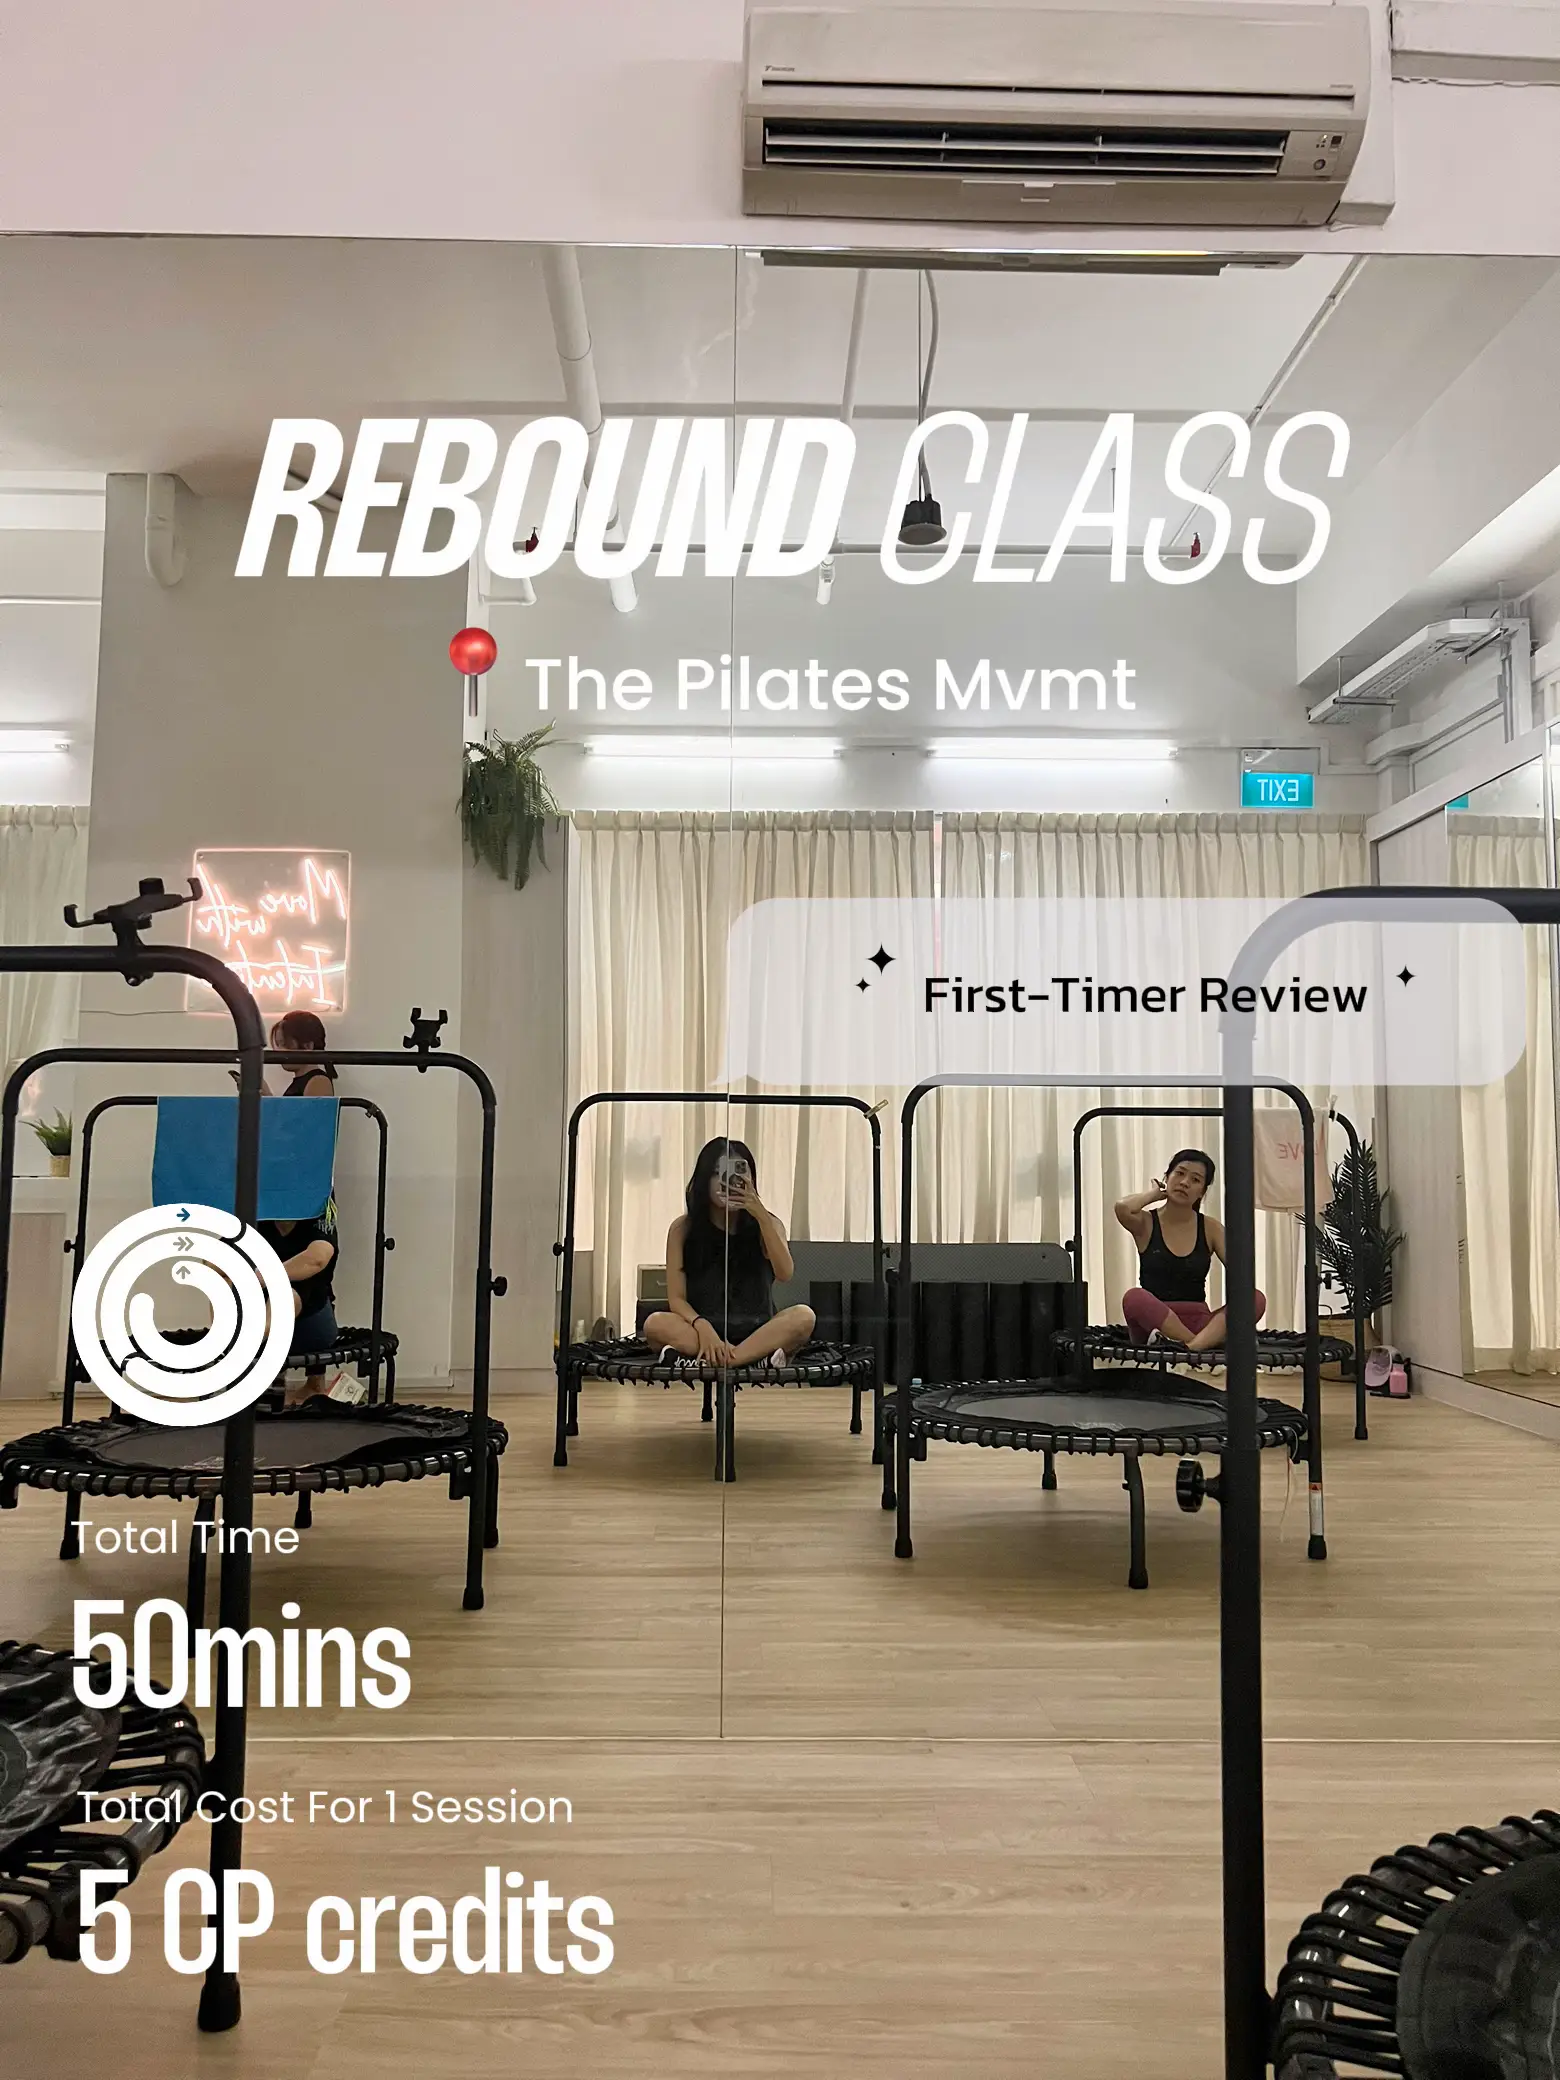 The Pilates Mvmt: Read Reviews and Book Classes on ClassPass